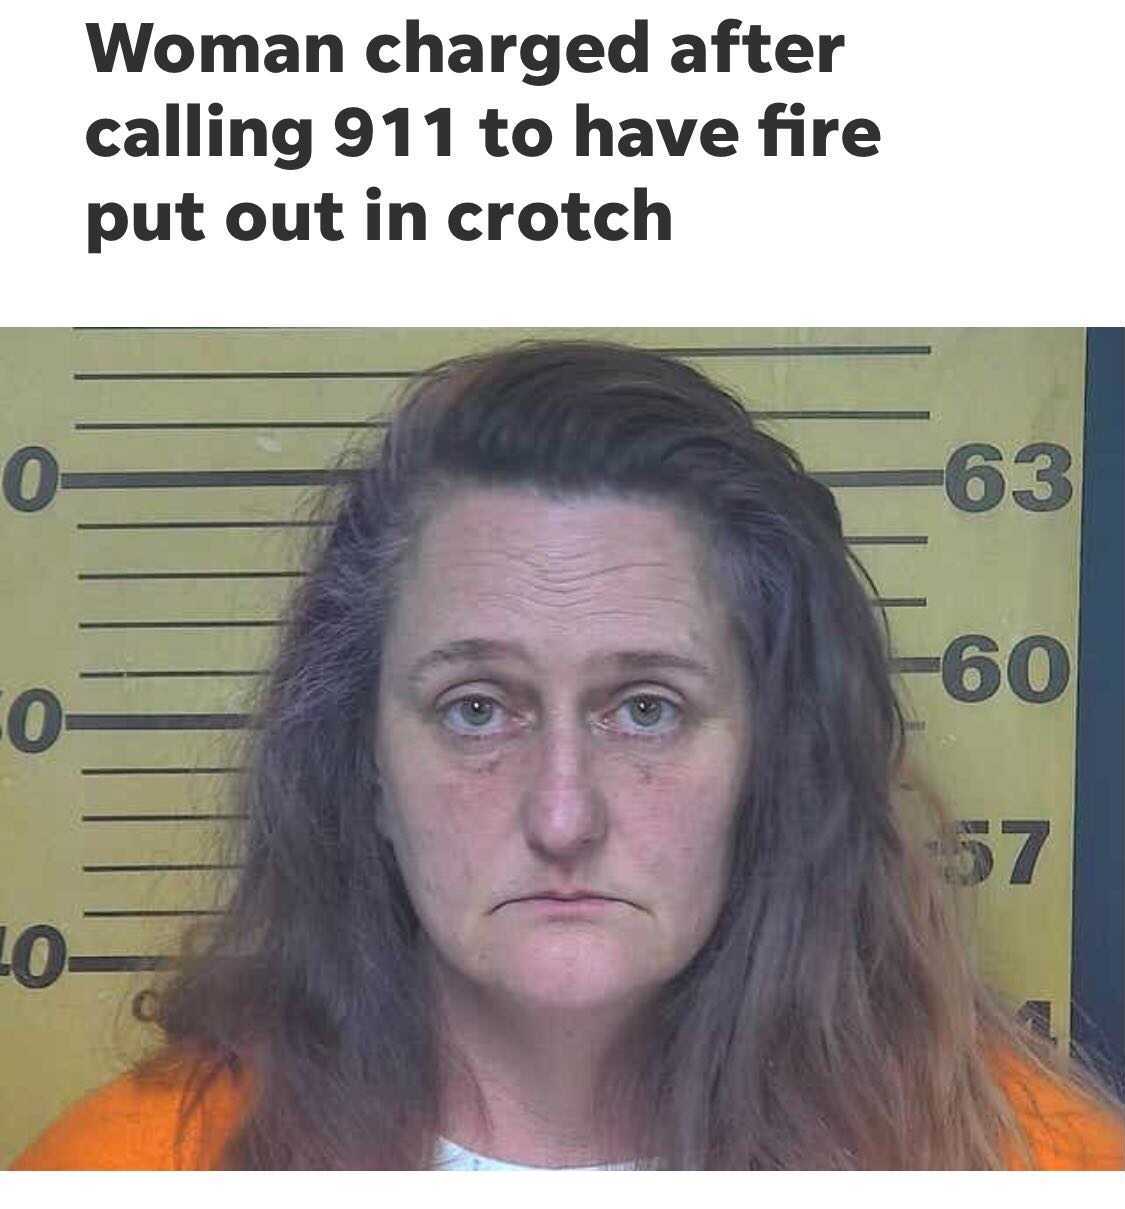 head - Woman charged after calling 911 to have fire put out in crotch 0 63 60 0 57 Lo